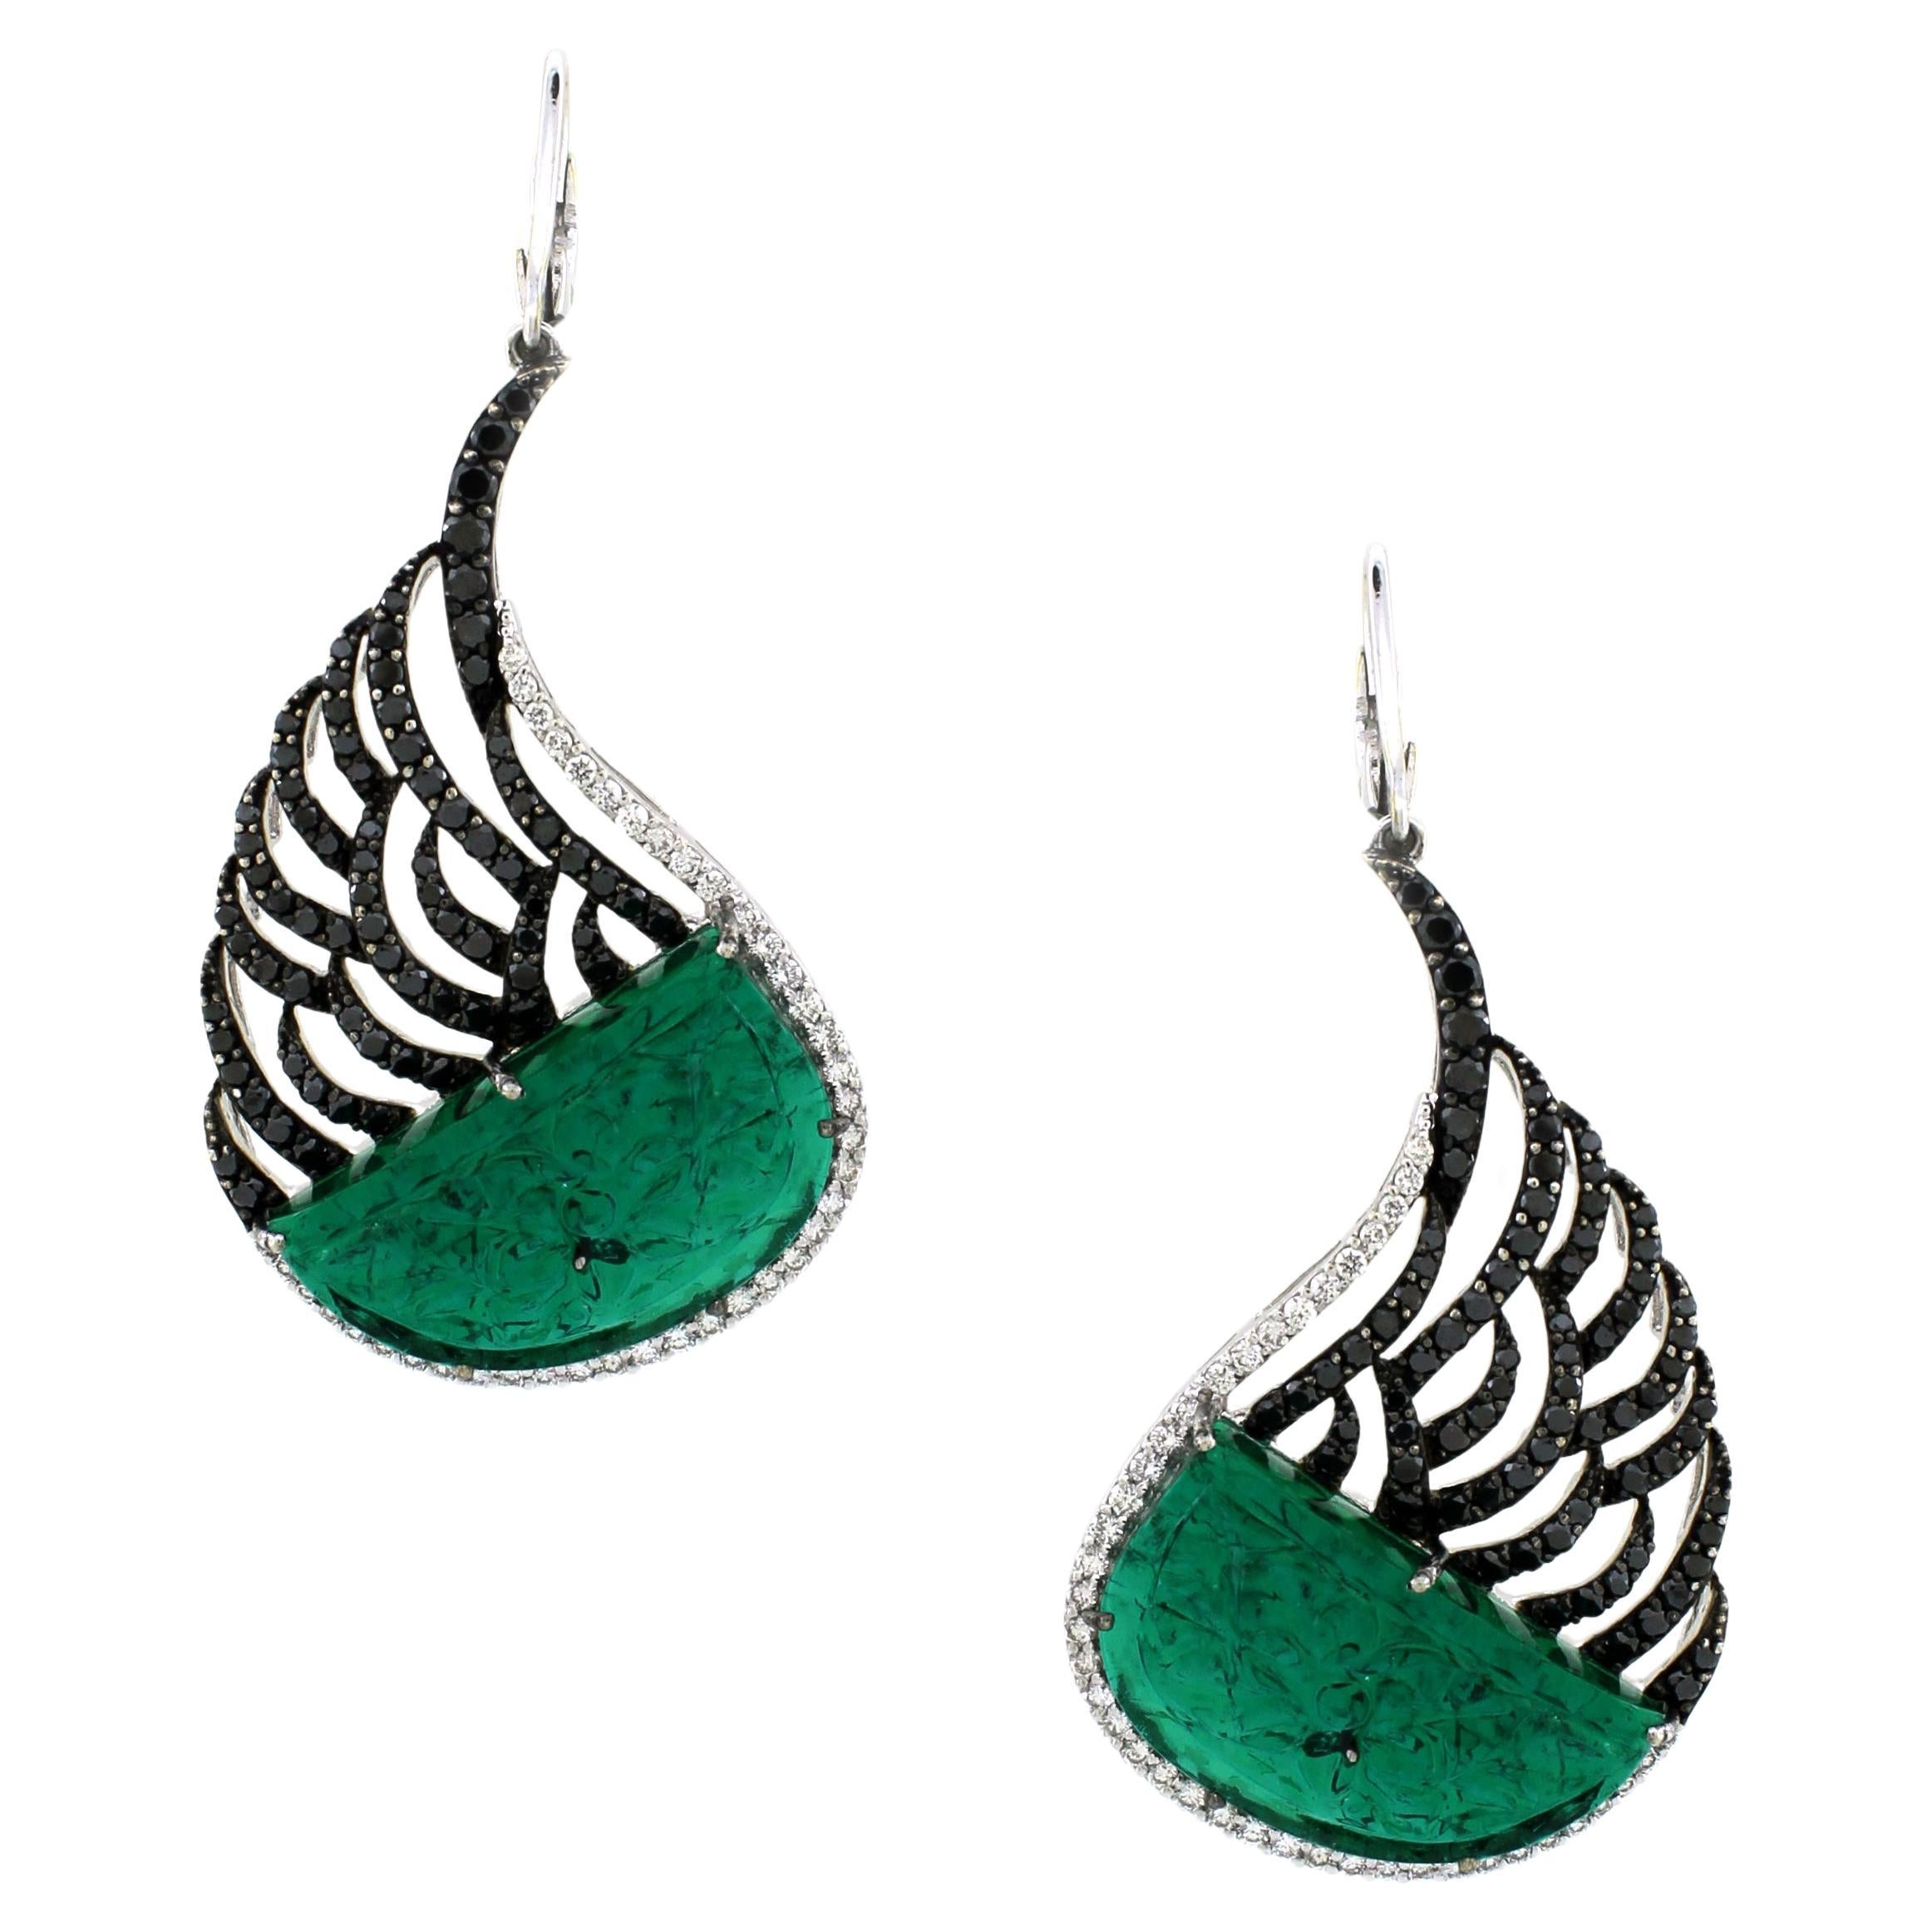 20.73 carats of Emerald Feather Inspired Earrings For Sale